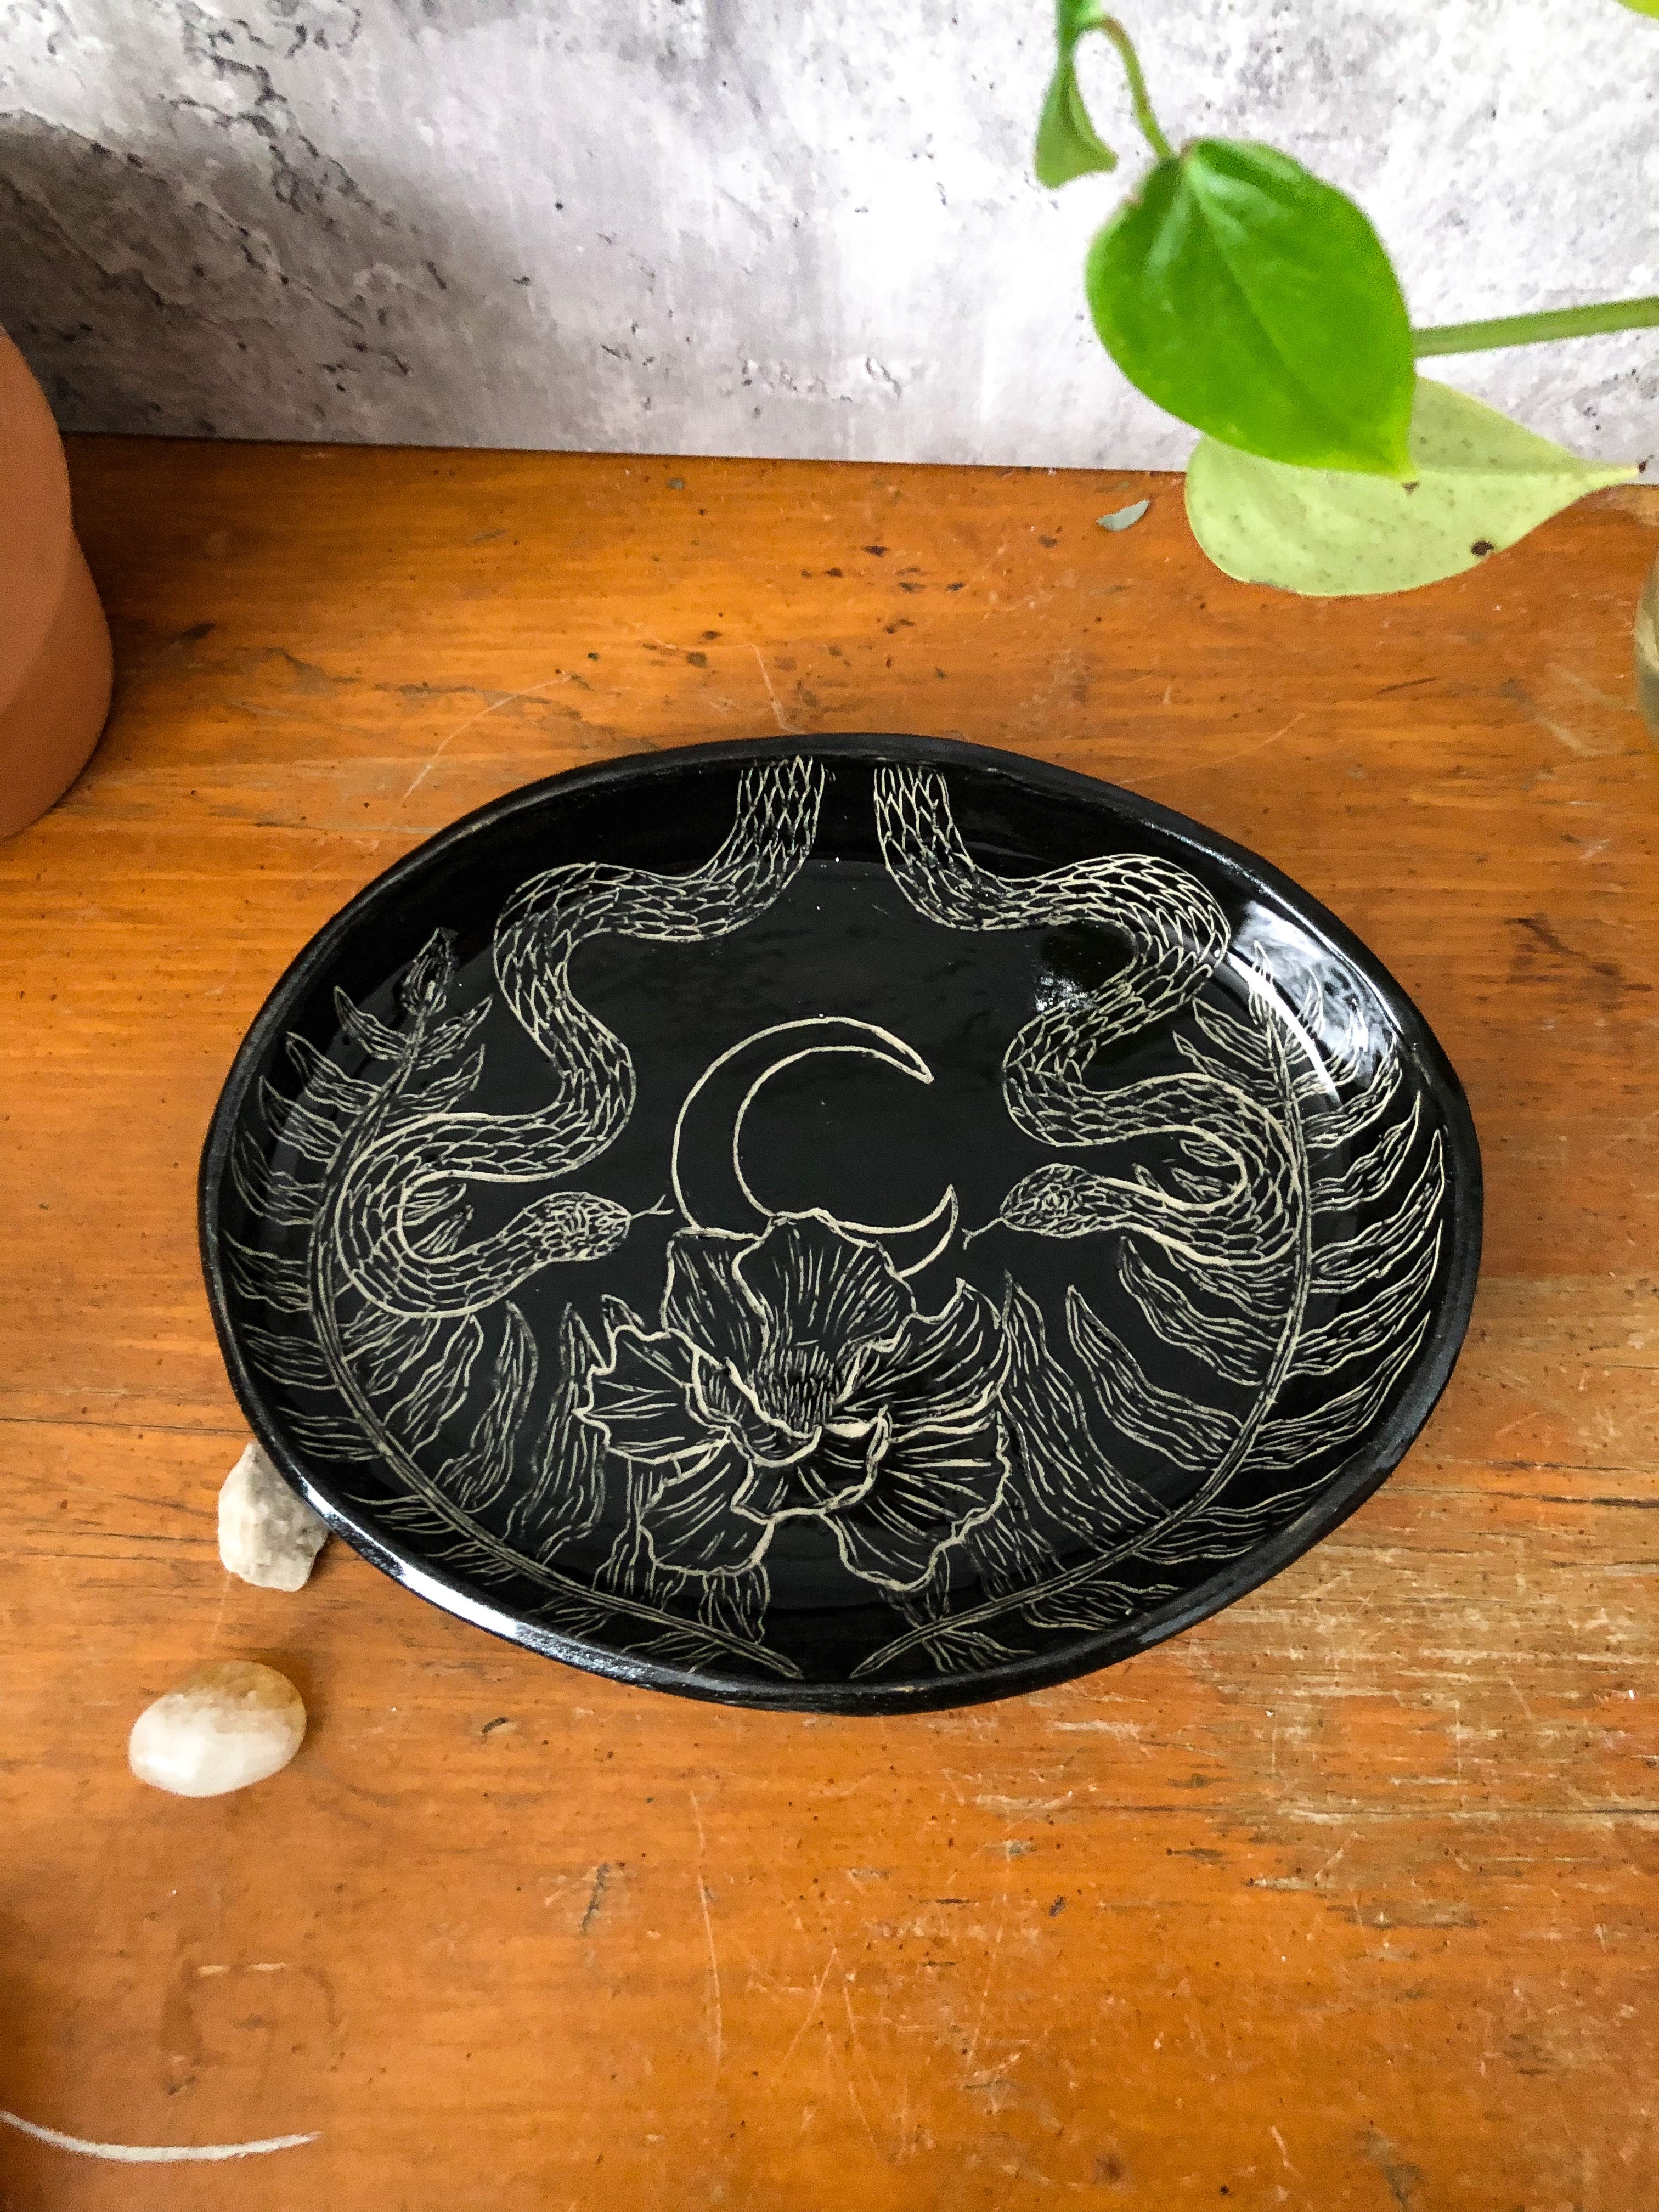 Made and carved by hand, the platter is alive with night critters